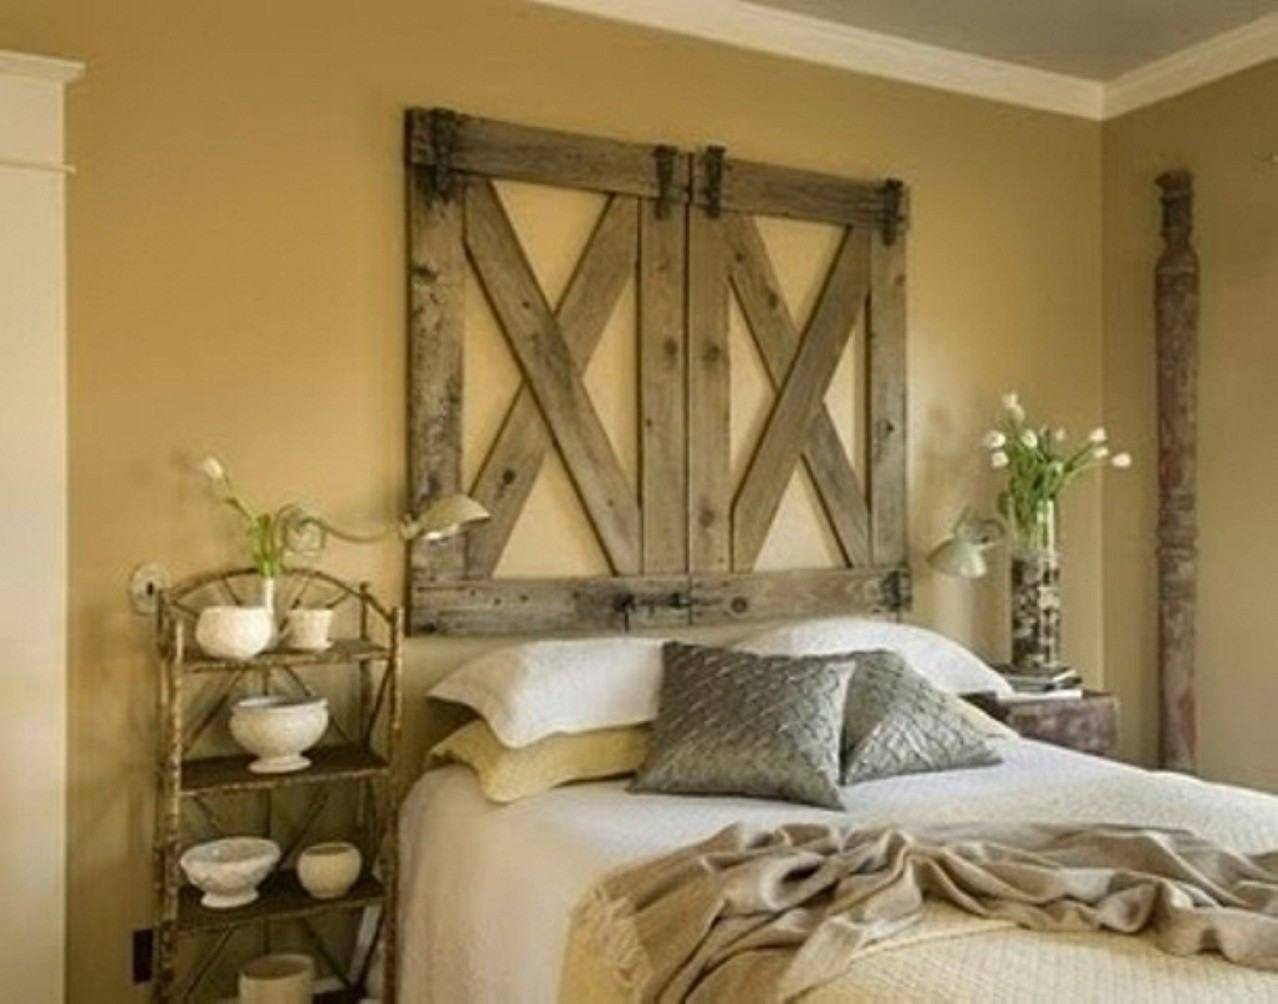 Rustic Bedroom Wall Art
 Adding Wall Decor Ideas The Way to Beautify Your Room